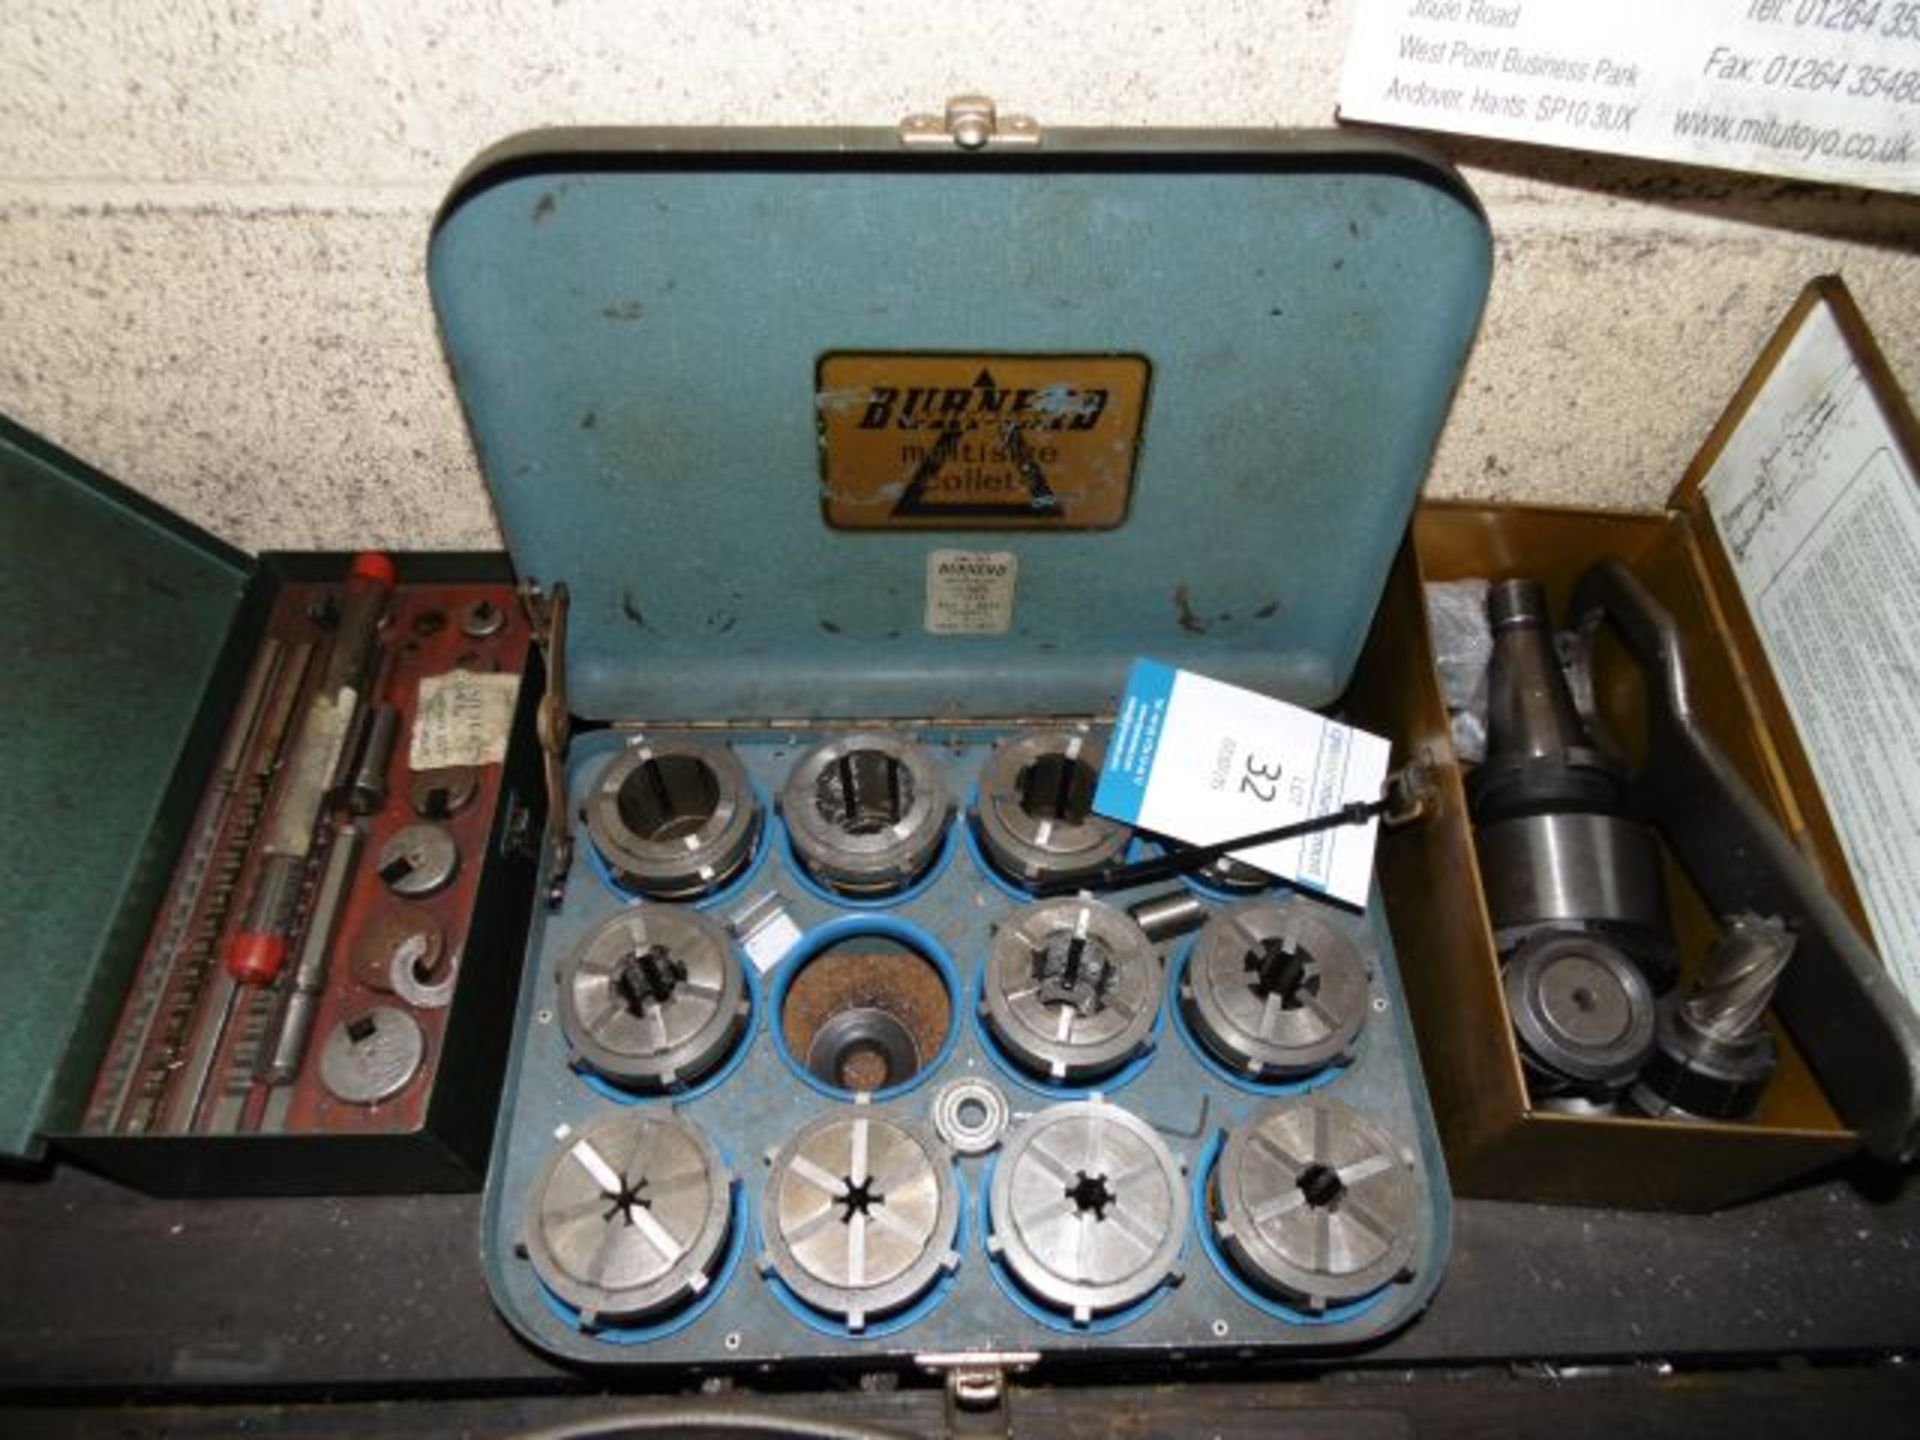 * Erickson Acramil Screwed Shank Milling Chuck, cased part-set of Burned type S Multisize Collets